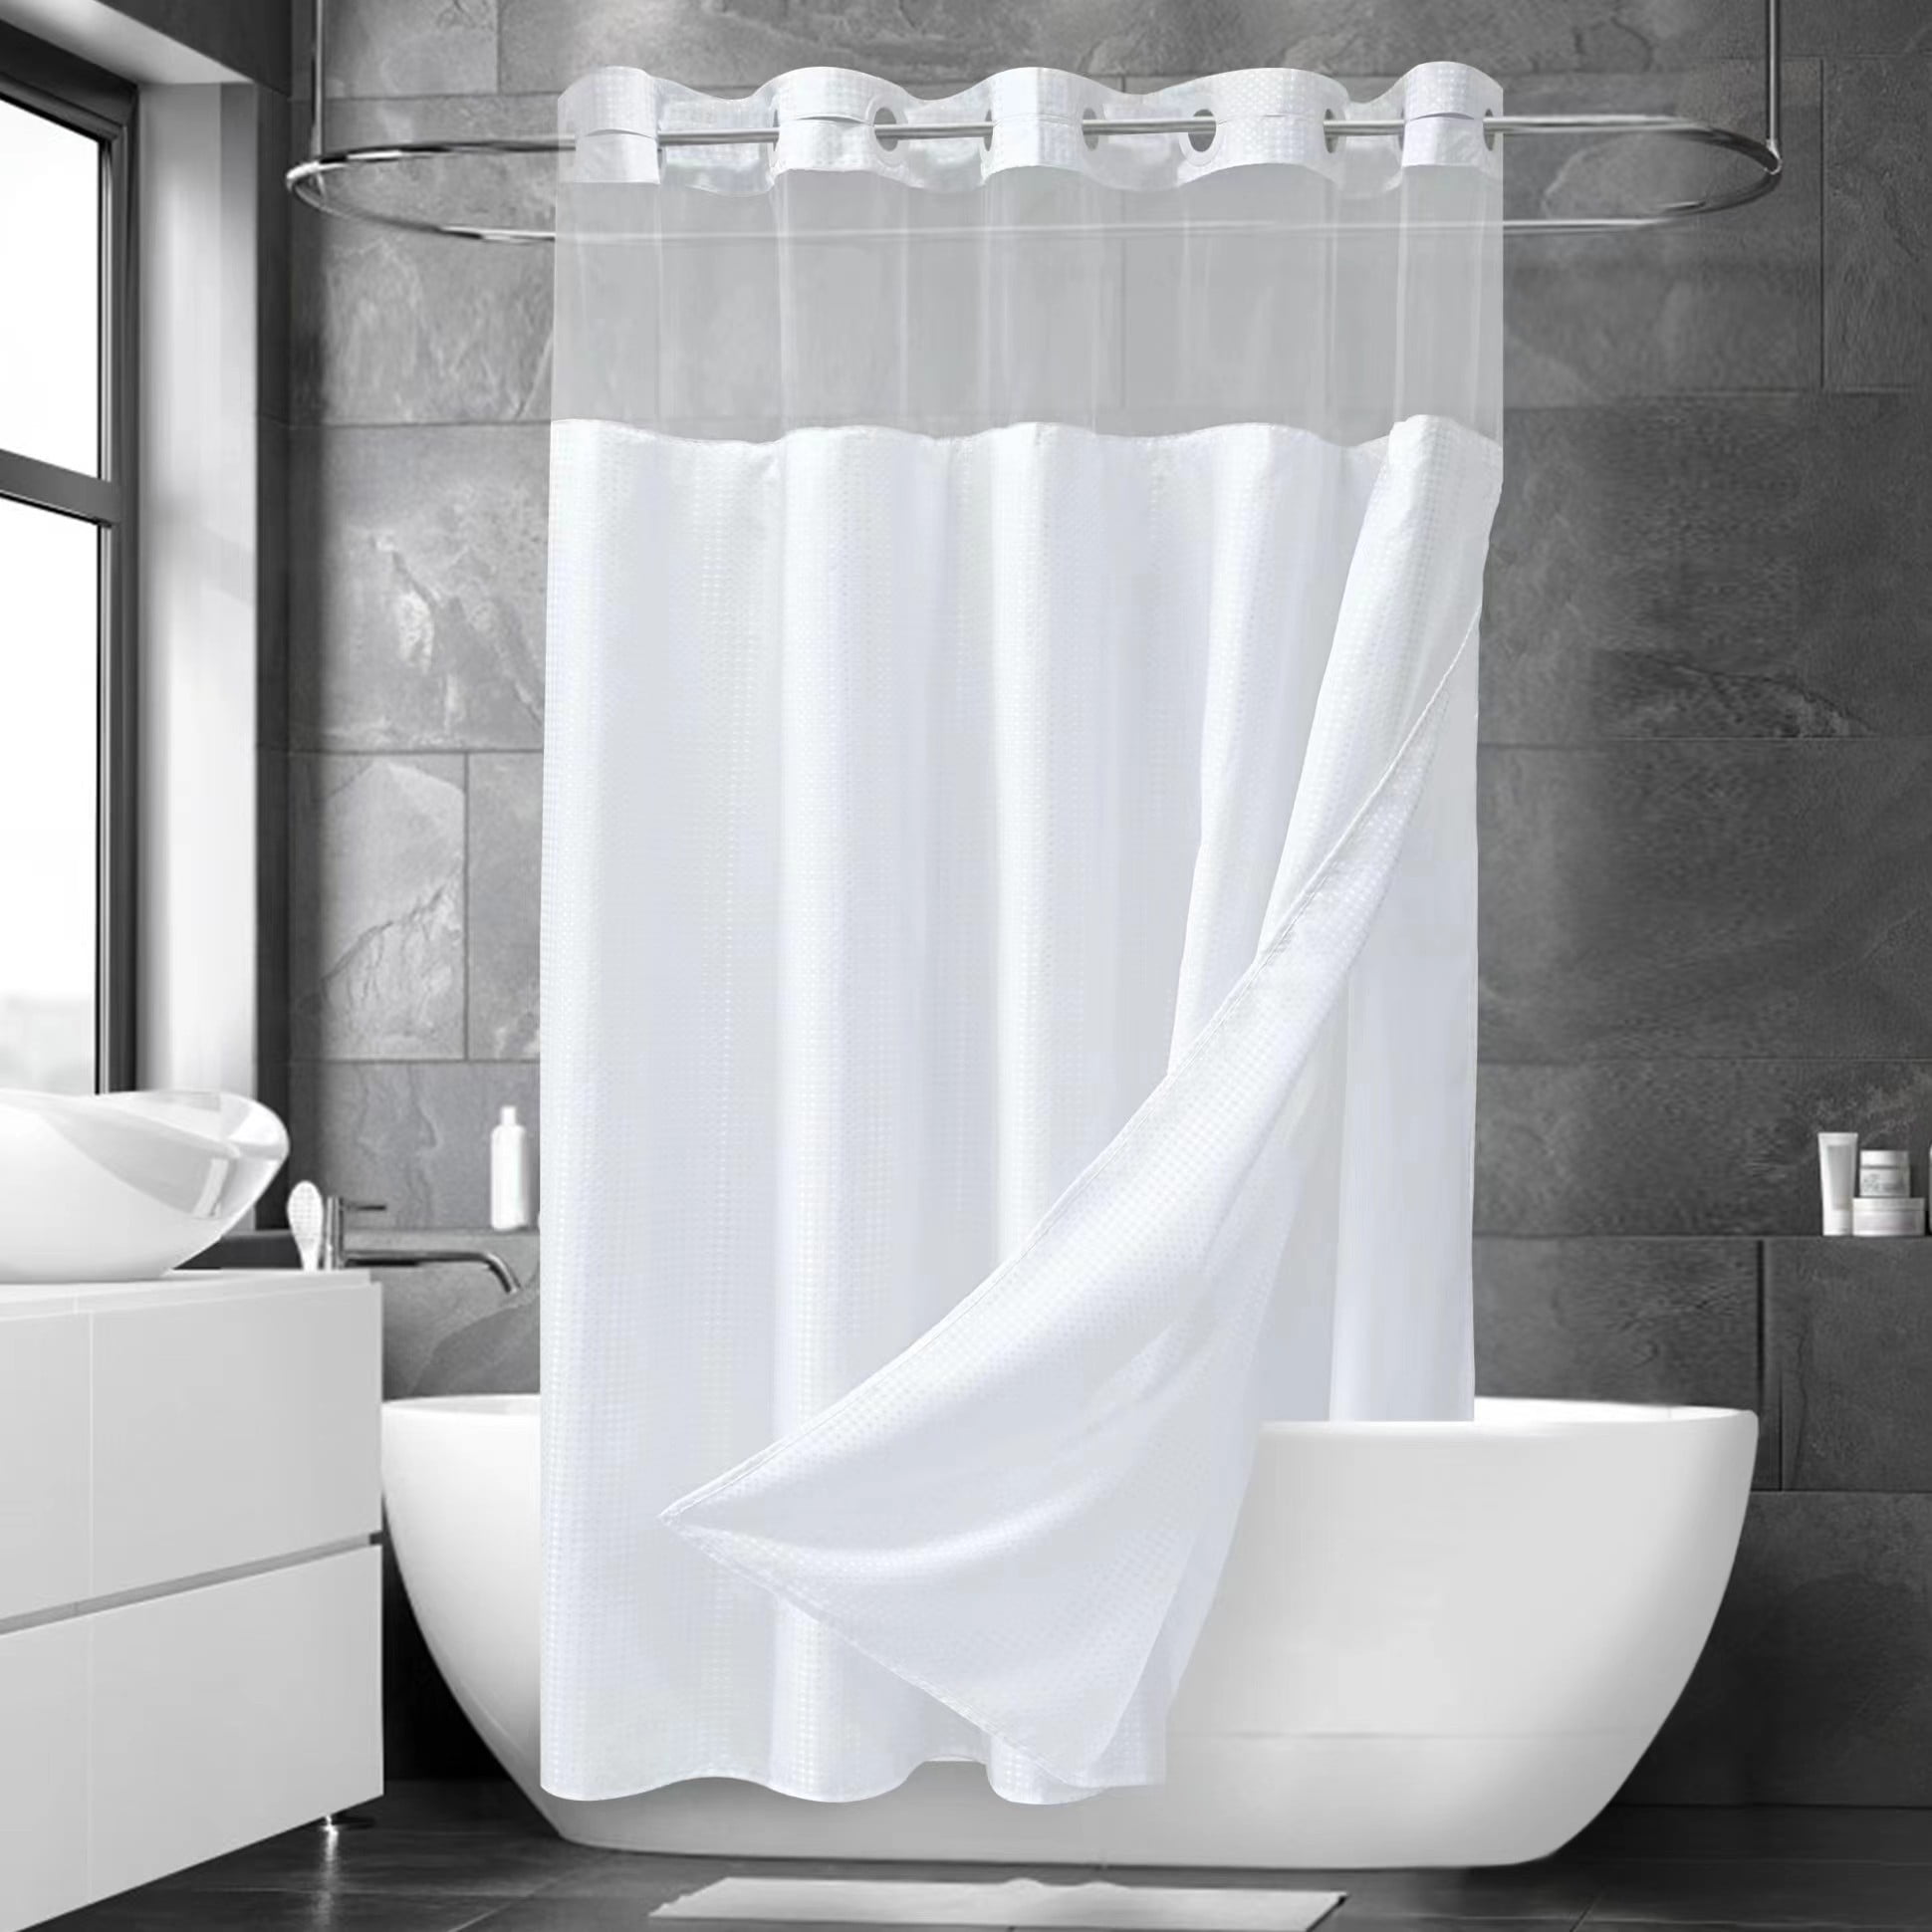 Ikfashoni White Hookless Fabric Shower Curtain with Snap in Liner